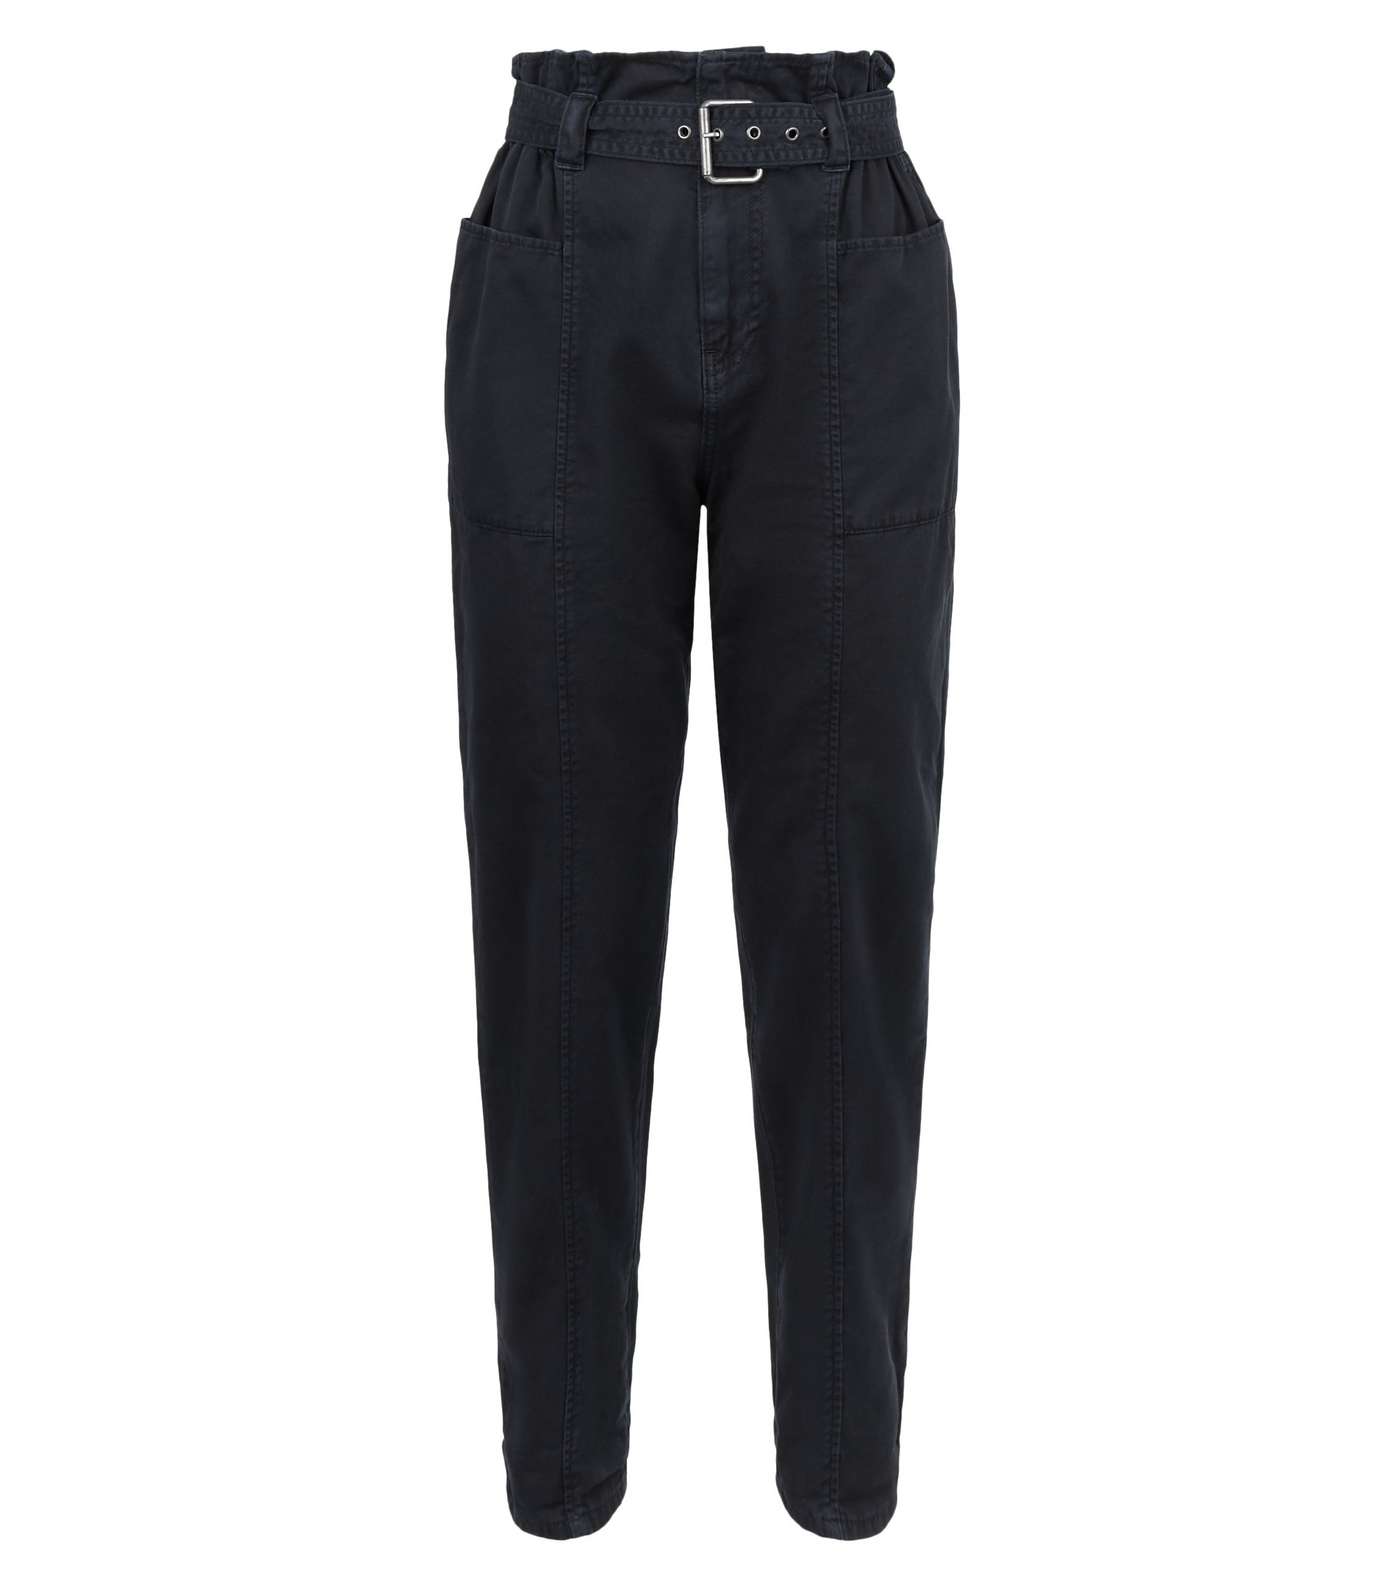 Black Denim High Waist Belted Utility Trousers Image 4